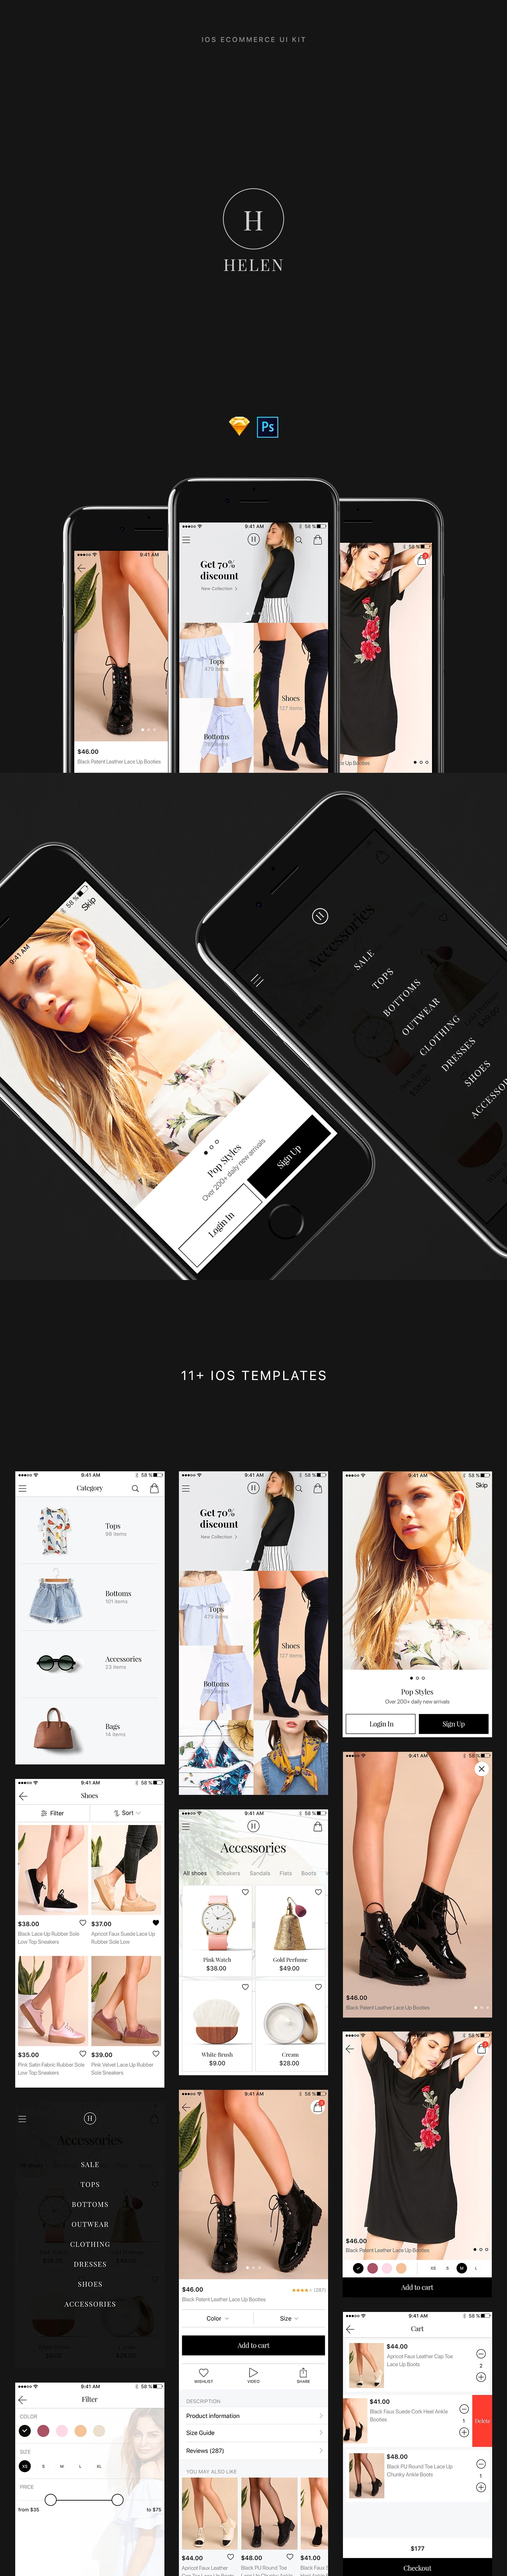 Helen Free iOS Ecommerce Ui Kit - Helen is a wonderful, professionally designed iOS ecommerce UI Kit for Sketch and Photoshop. All elements well organized into 11+ high-quality screens.